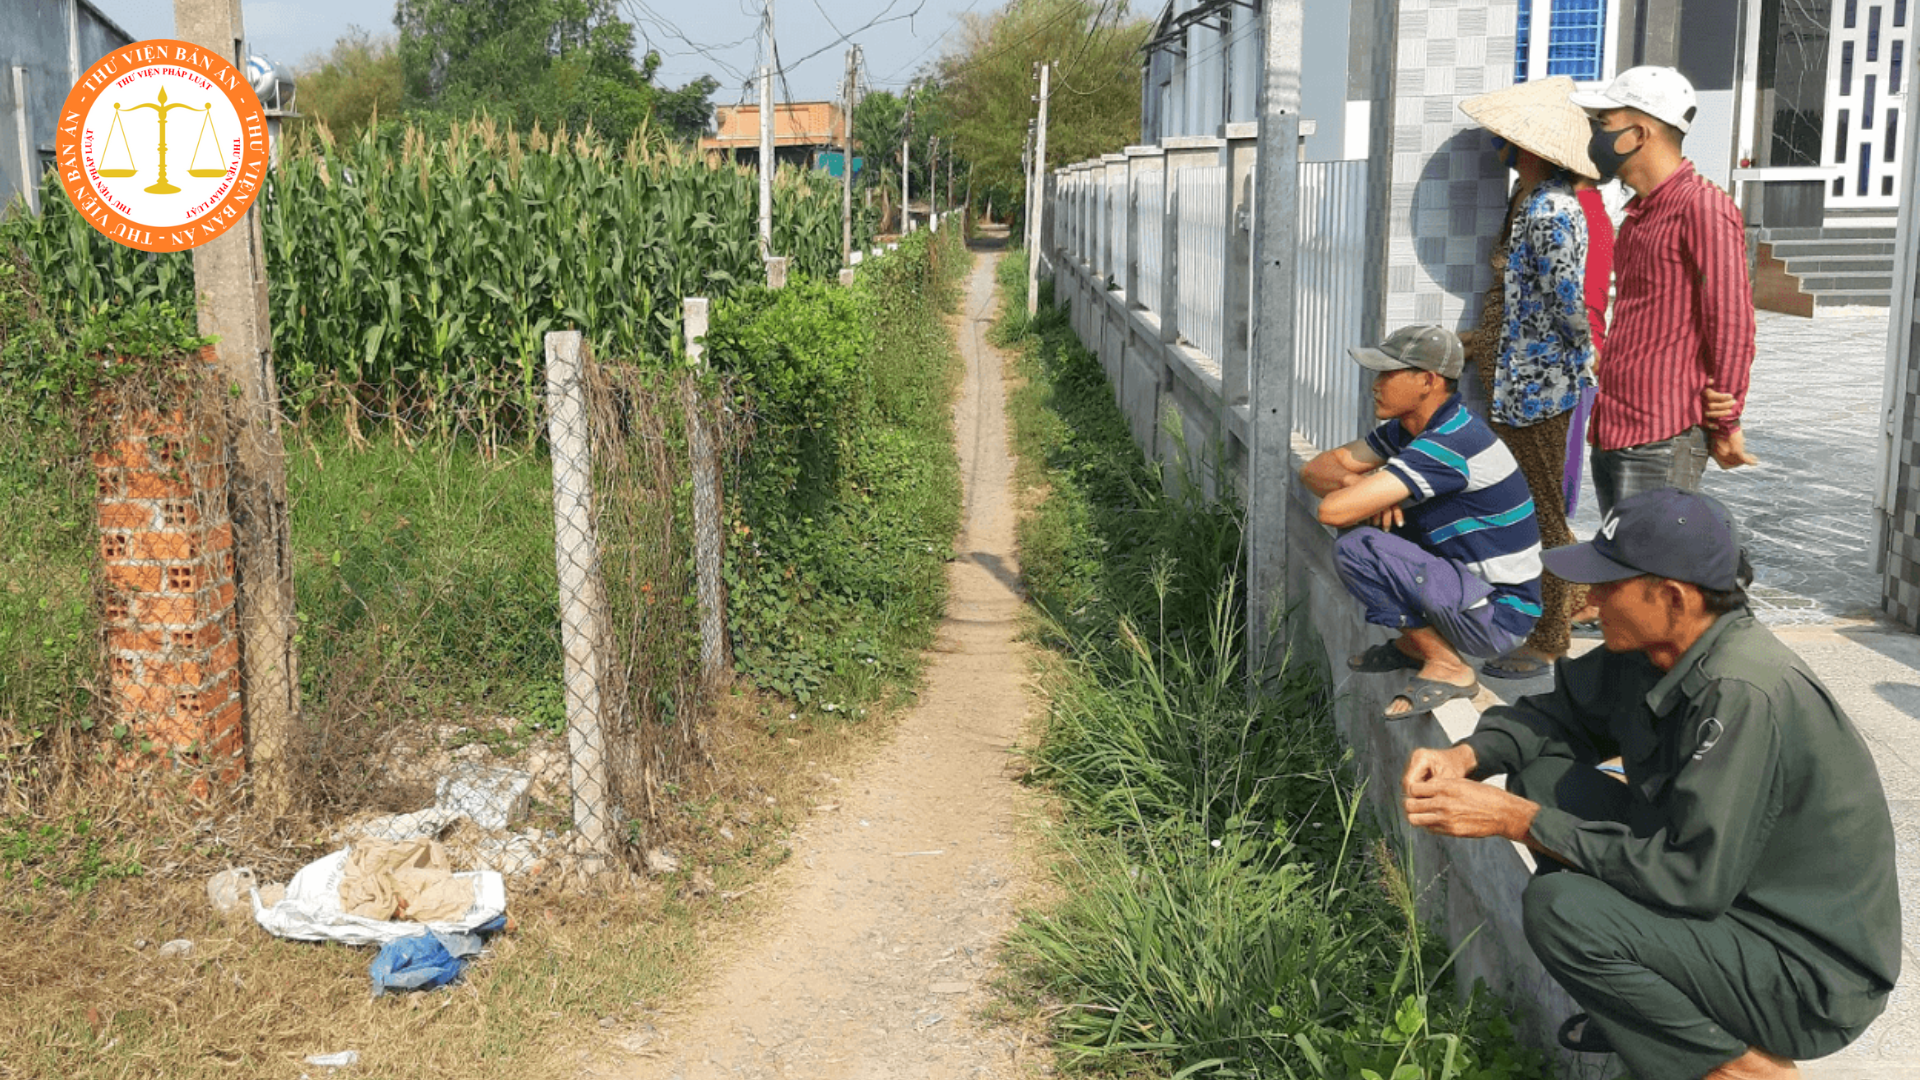 Disputes on shared pathway and some related judgments in Vietnam